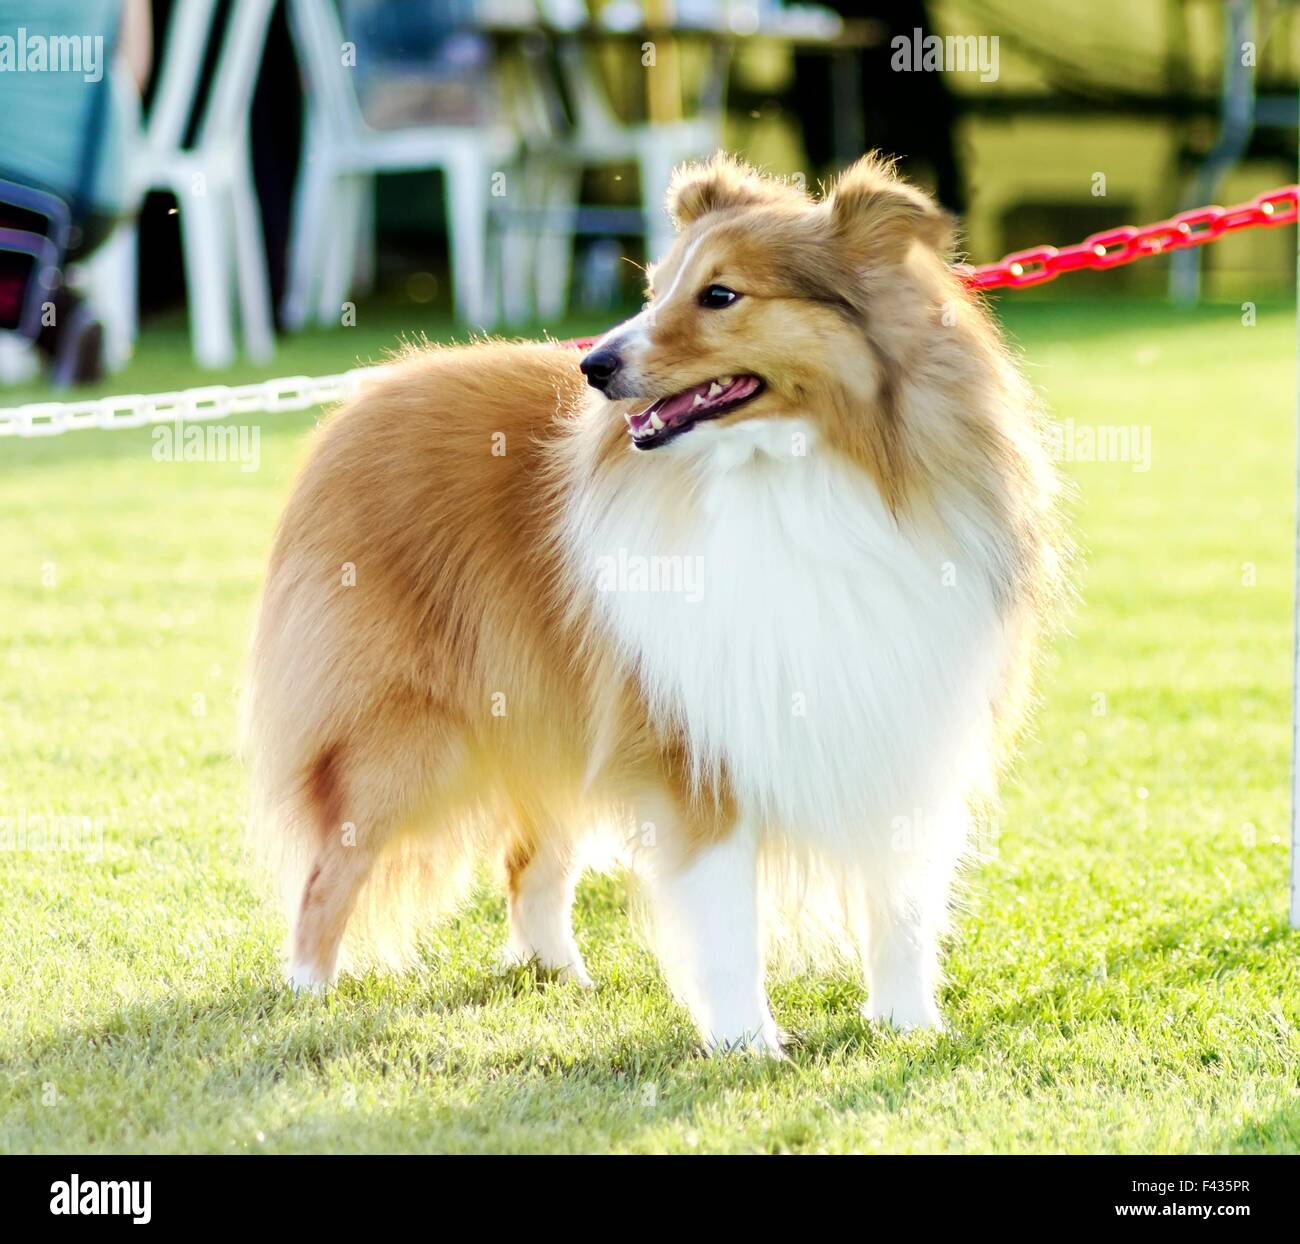 A young, beautiful, white and sable Shetland Sheepdog standing on the lawn looking happy and playful. Shetland Sheepdogs look li Stock Photo